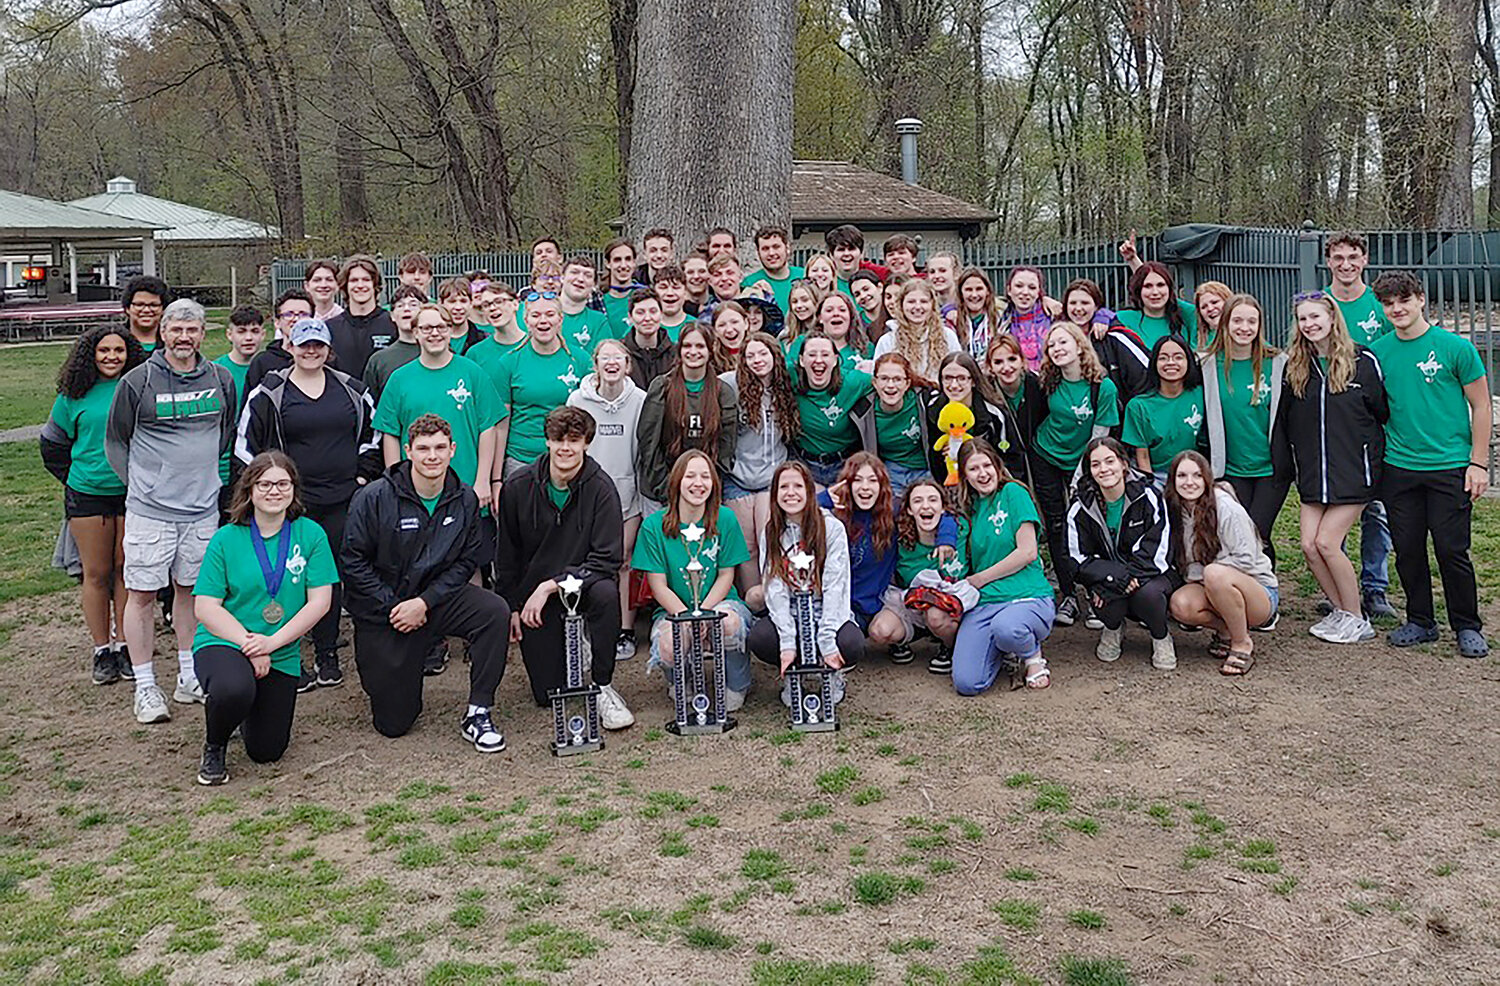 Herkimer Junior/Senior High School Symphonic Band and Chamber Choir students pose together April 22 at the Music in the Parks competition at Six Flags New England in Agawam, Massachusetts.